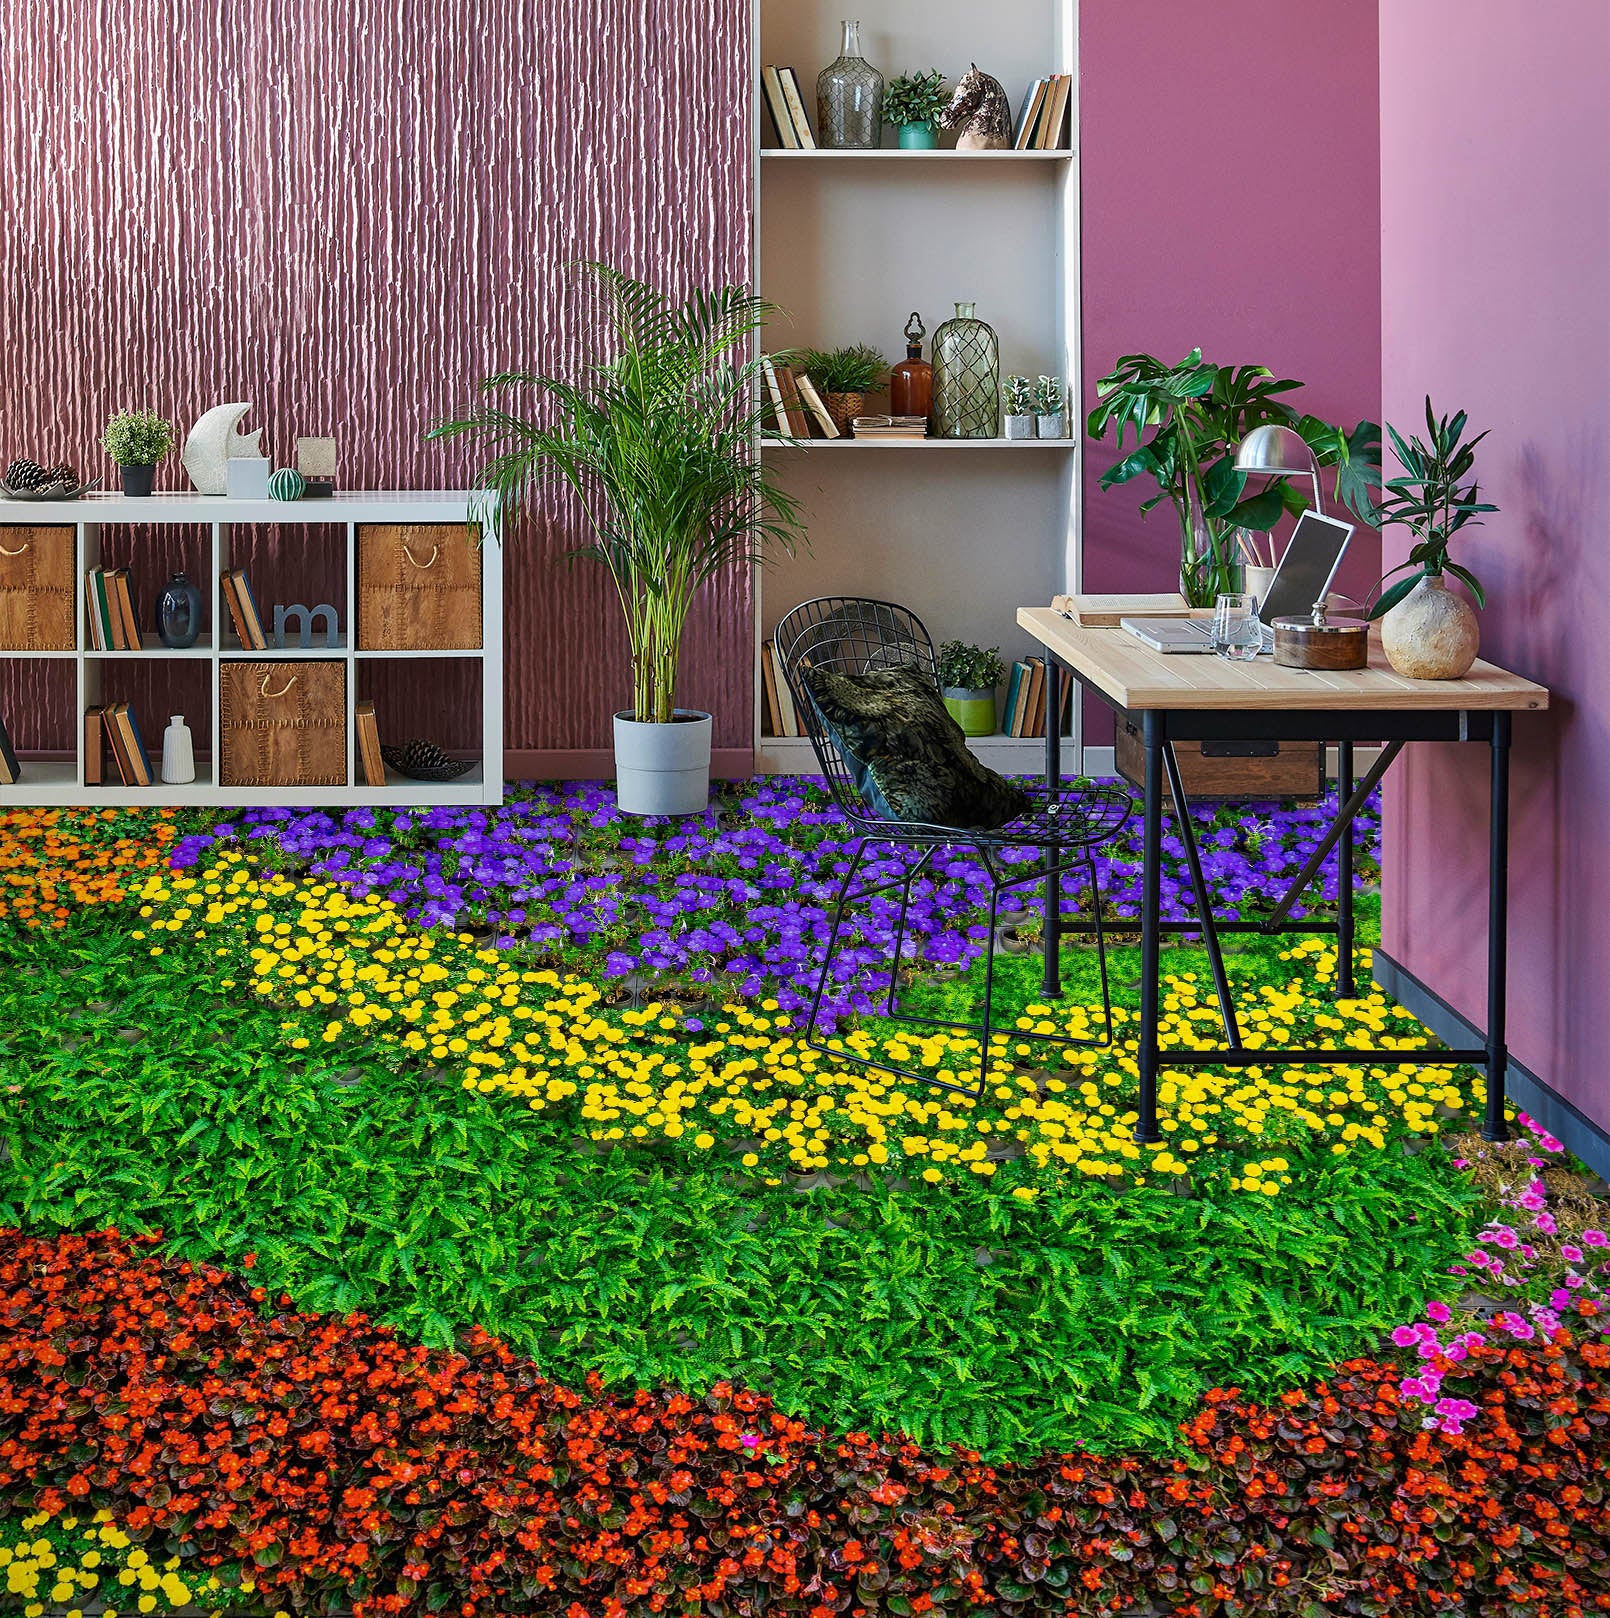 3D Four Kinds Of Flowers 963 Floor Mural  Wallpaper Murals Self-Adhesive Removable Print Epoxy